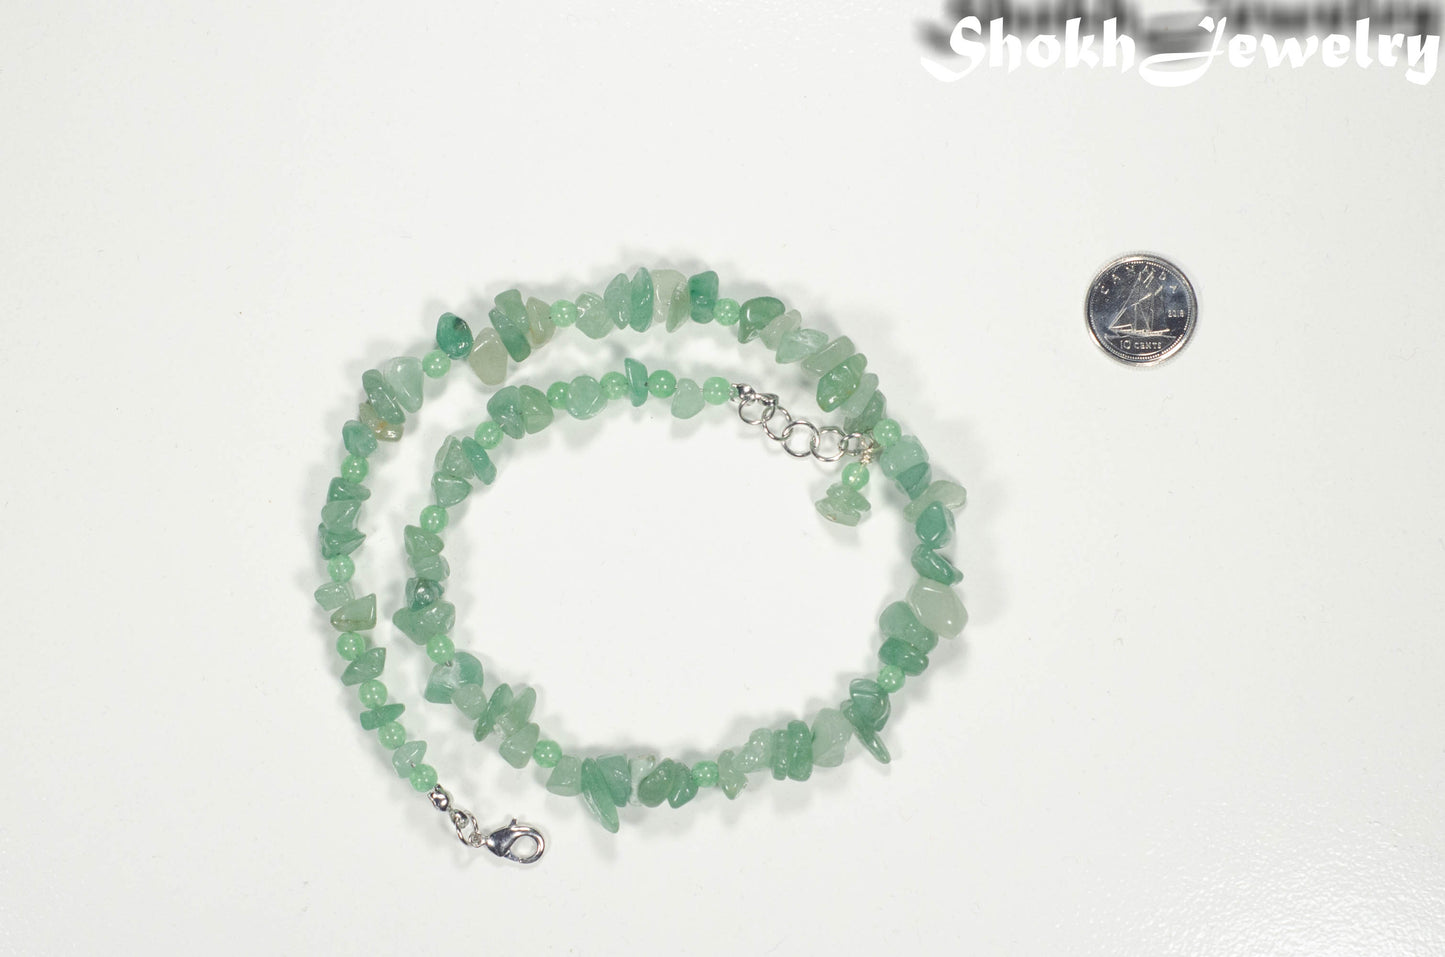 Natural Green Aventurine Crystal Chip Choker Necklace beside a dime